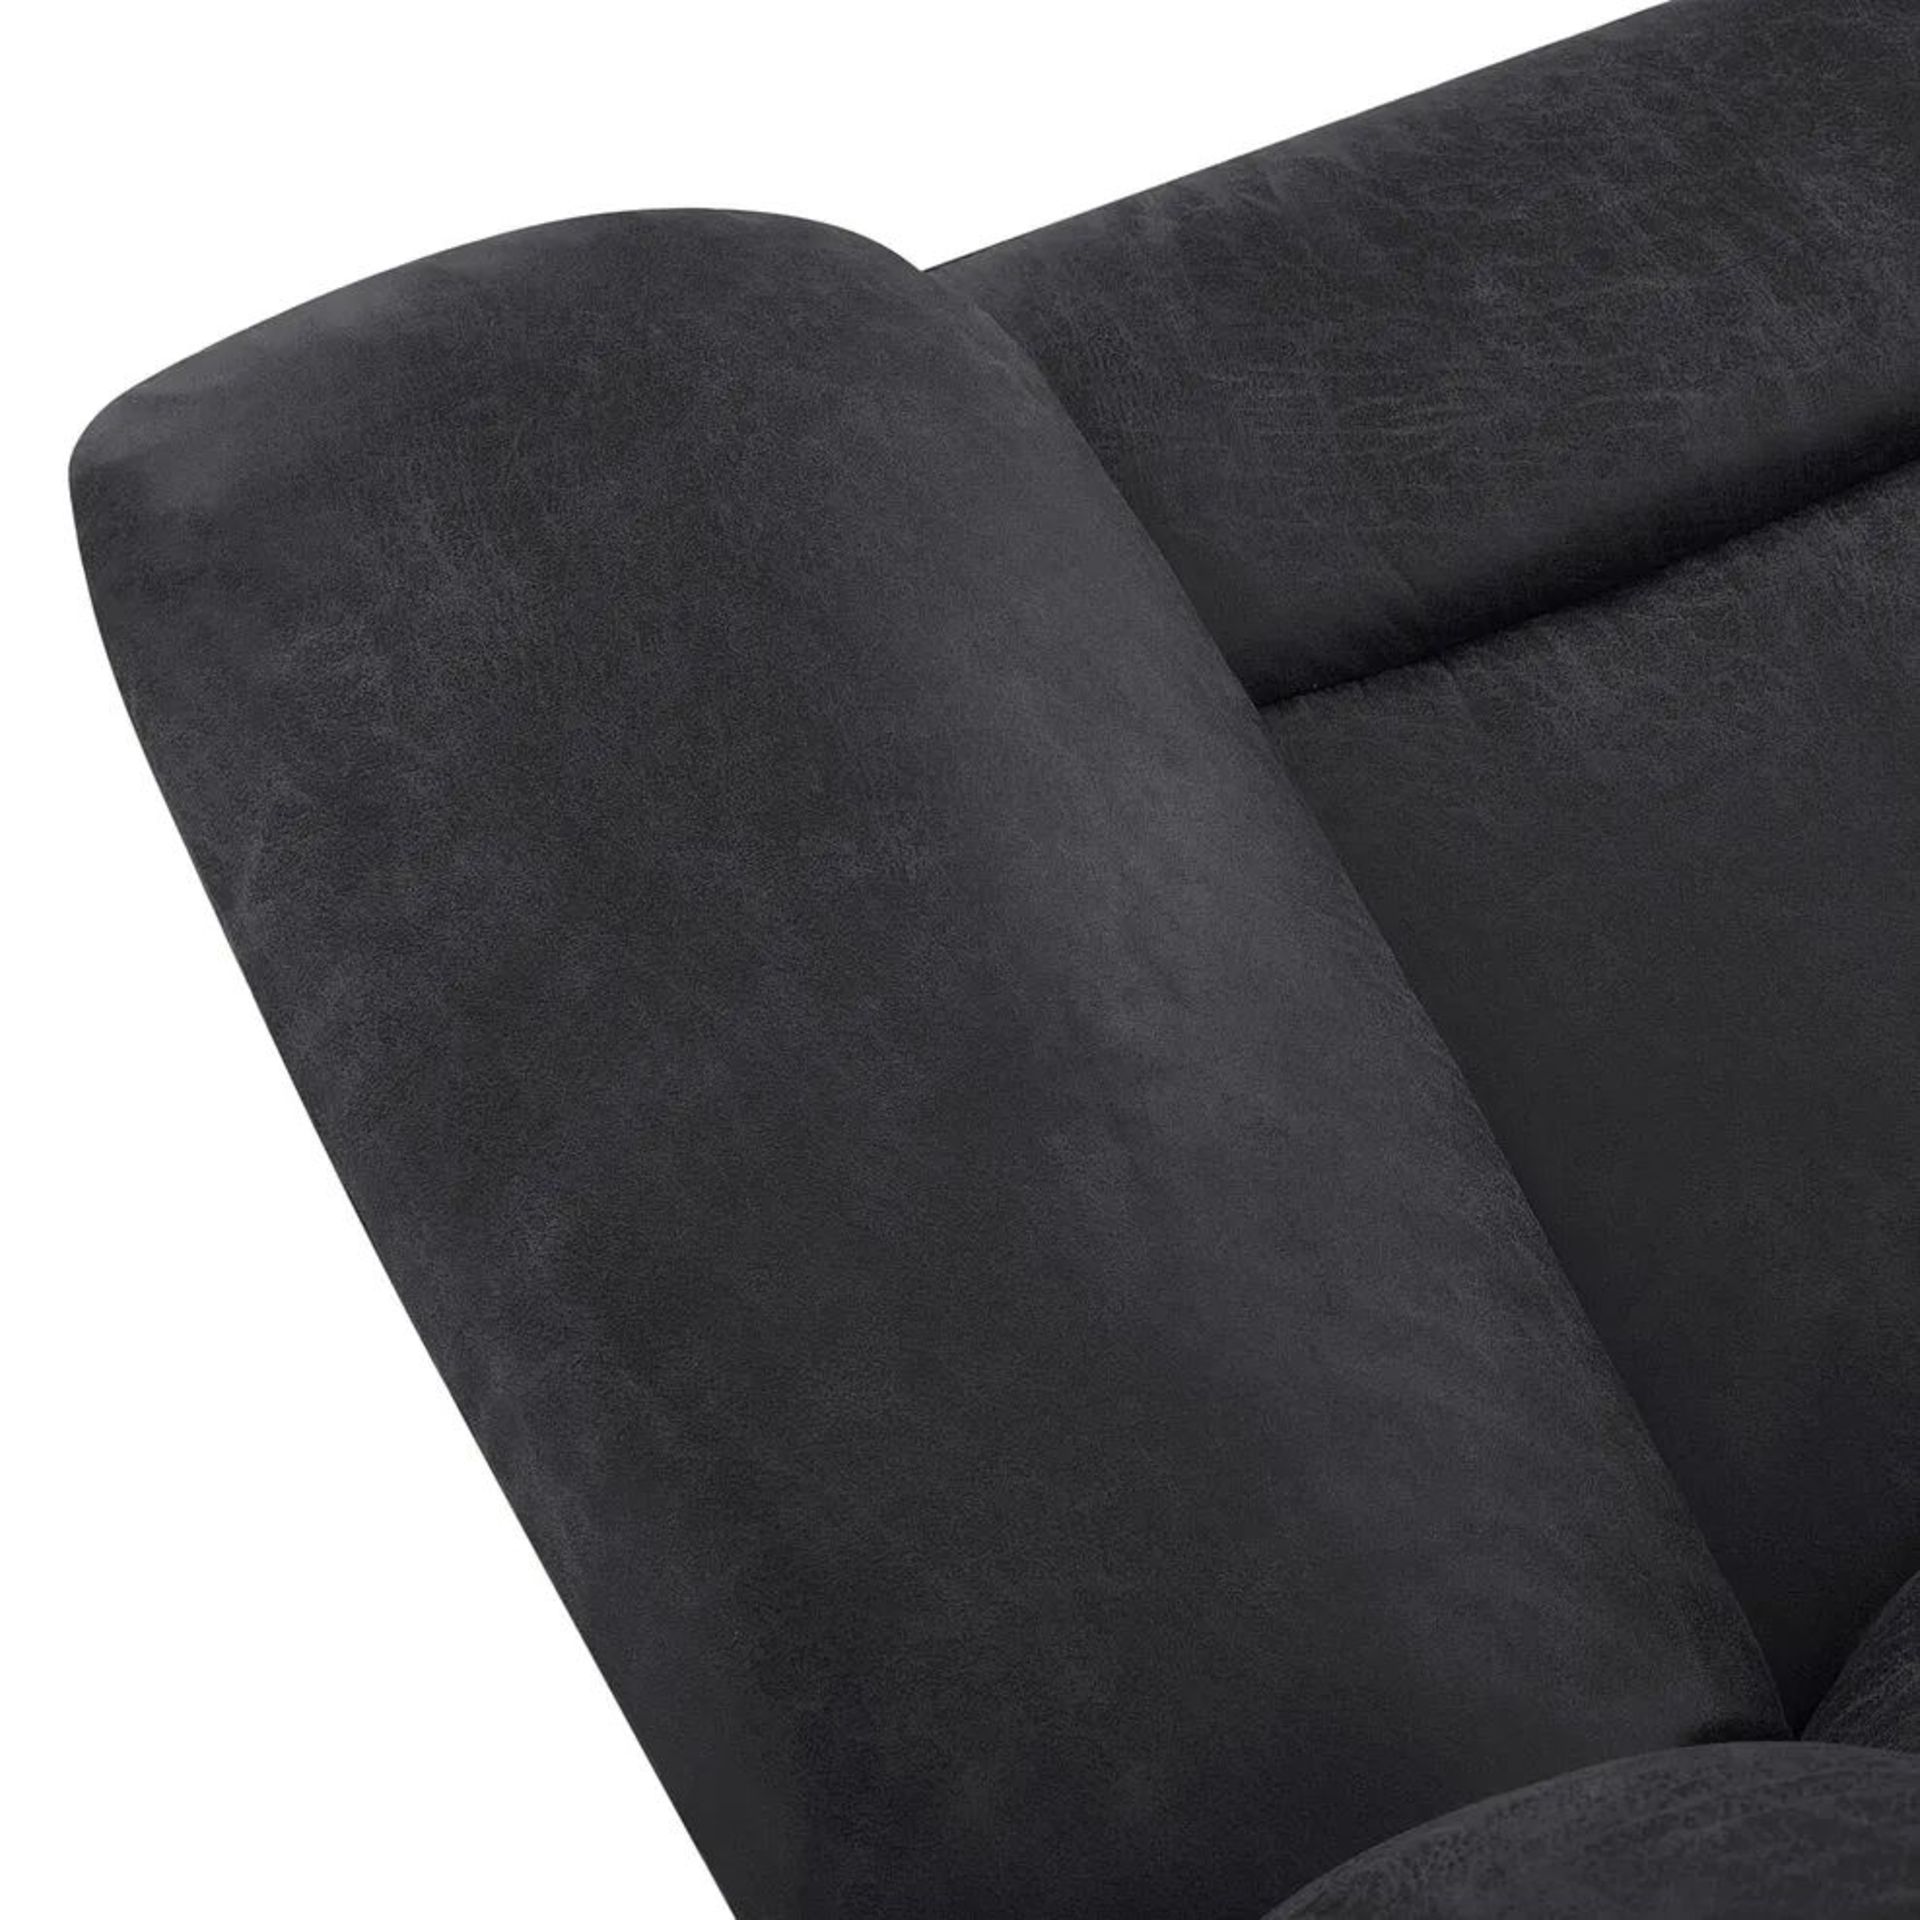 BRAND NEW MARLOW 2 Seater Electric Recliner Sofa - MILLER GREY FABRIC. RRP £1049. Designed to suit - Bild 11 aus 12